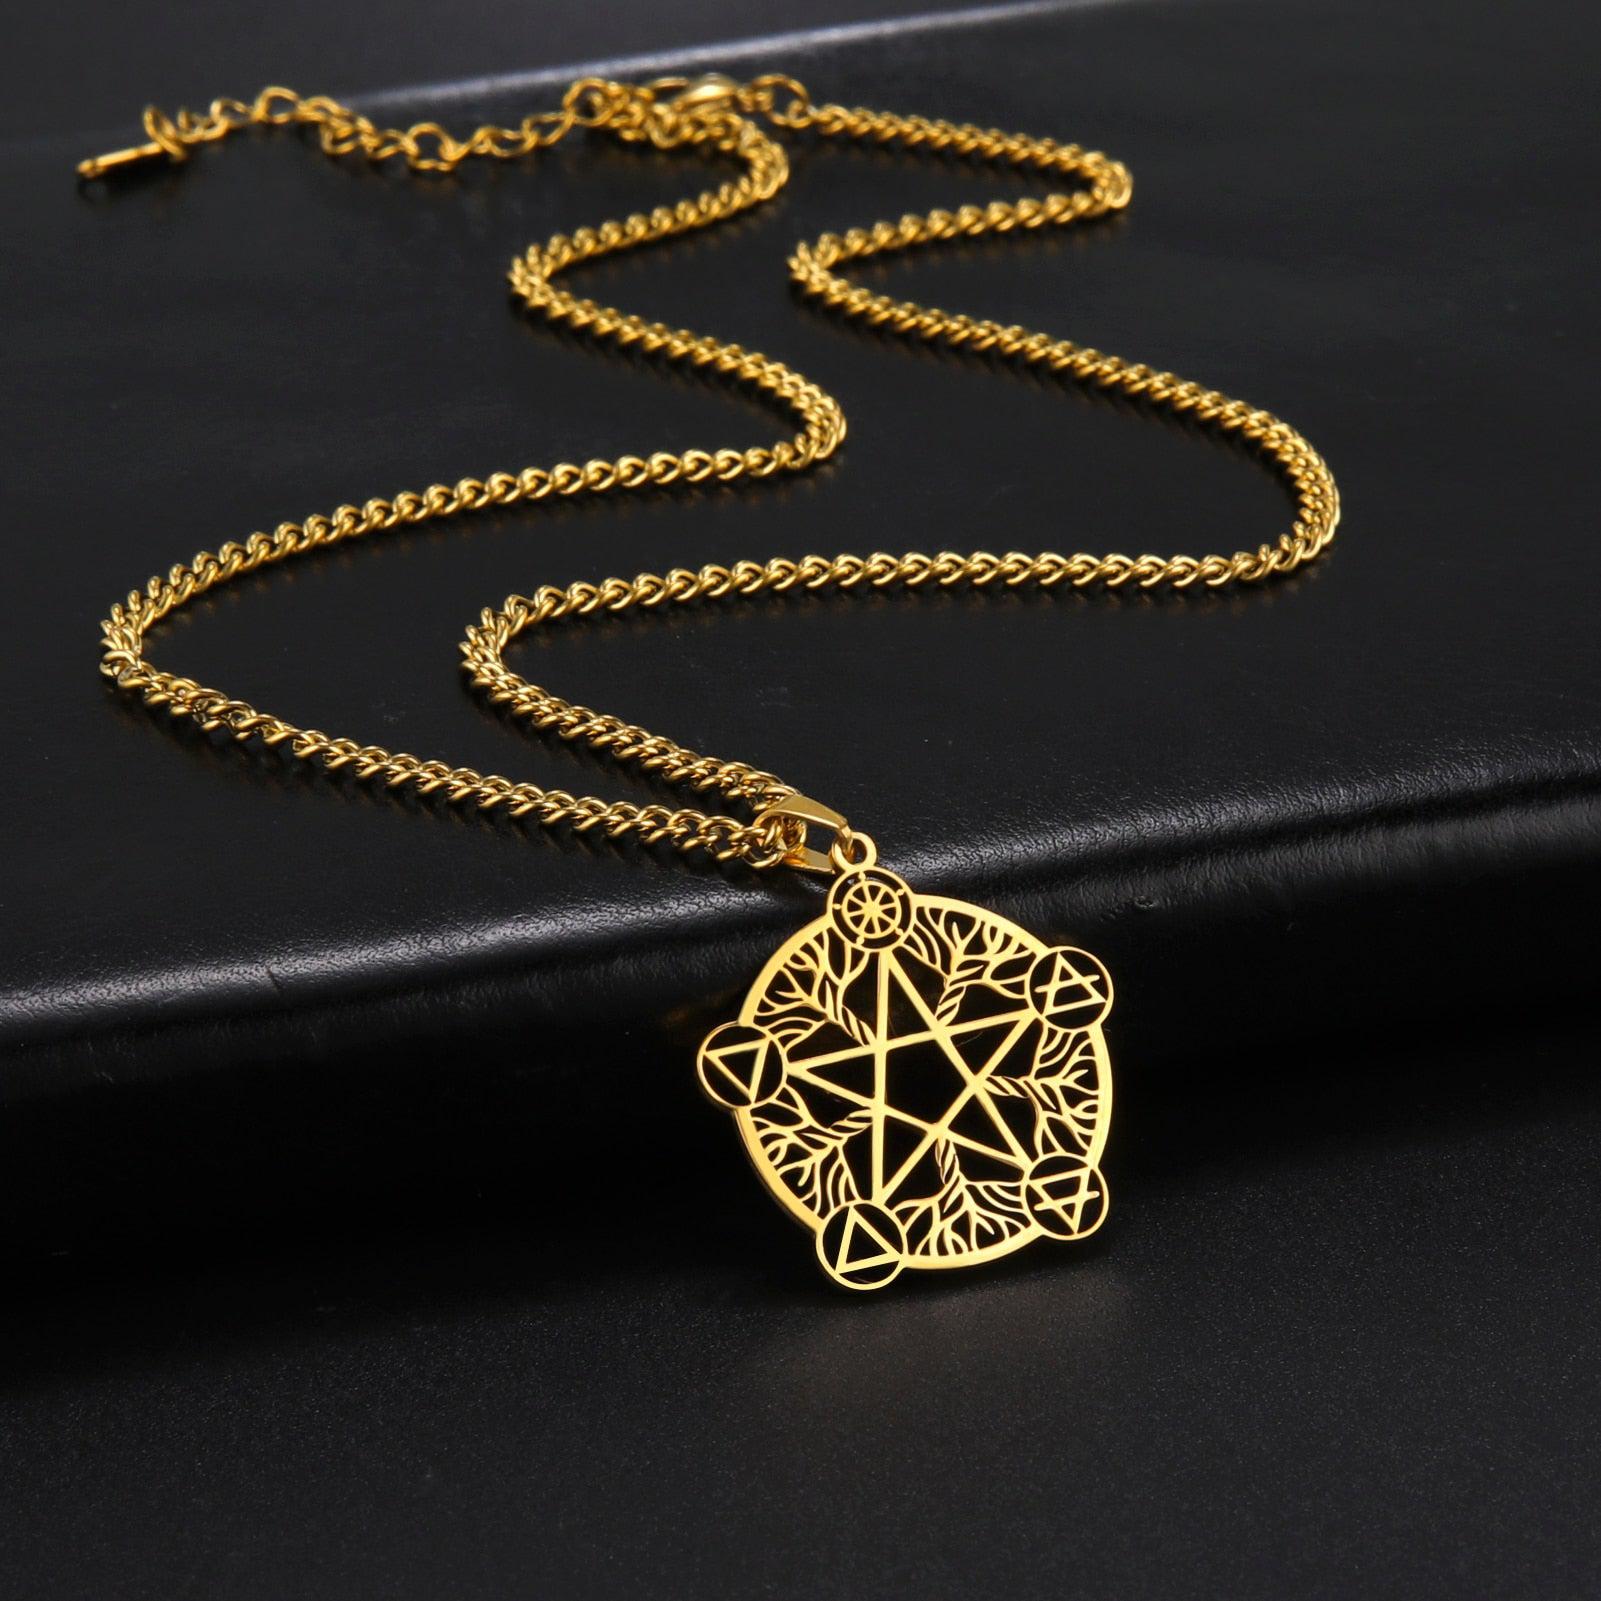 Wicca Pentacle Witch Necklace Amulet for Eternity and Infinity Pagan Necklace-MoonChildWorld